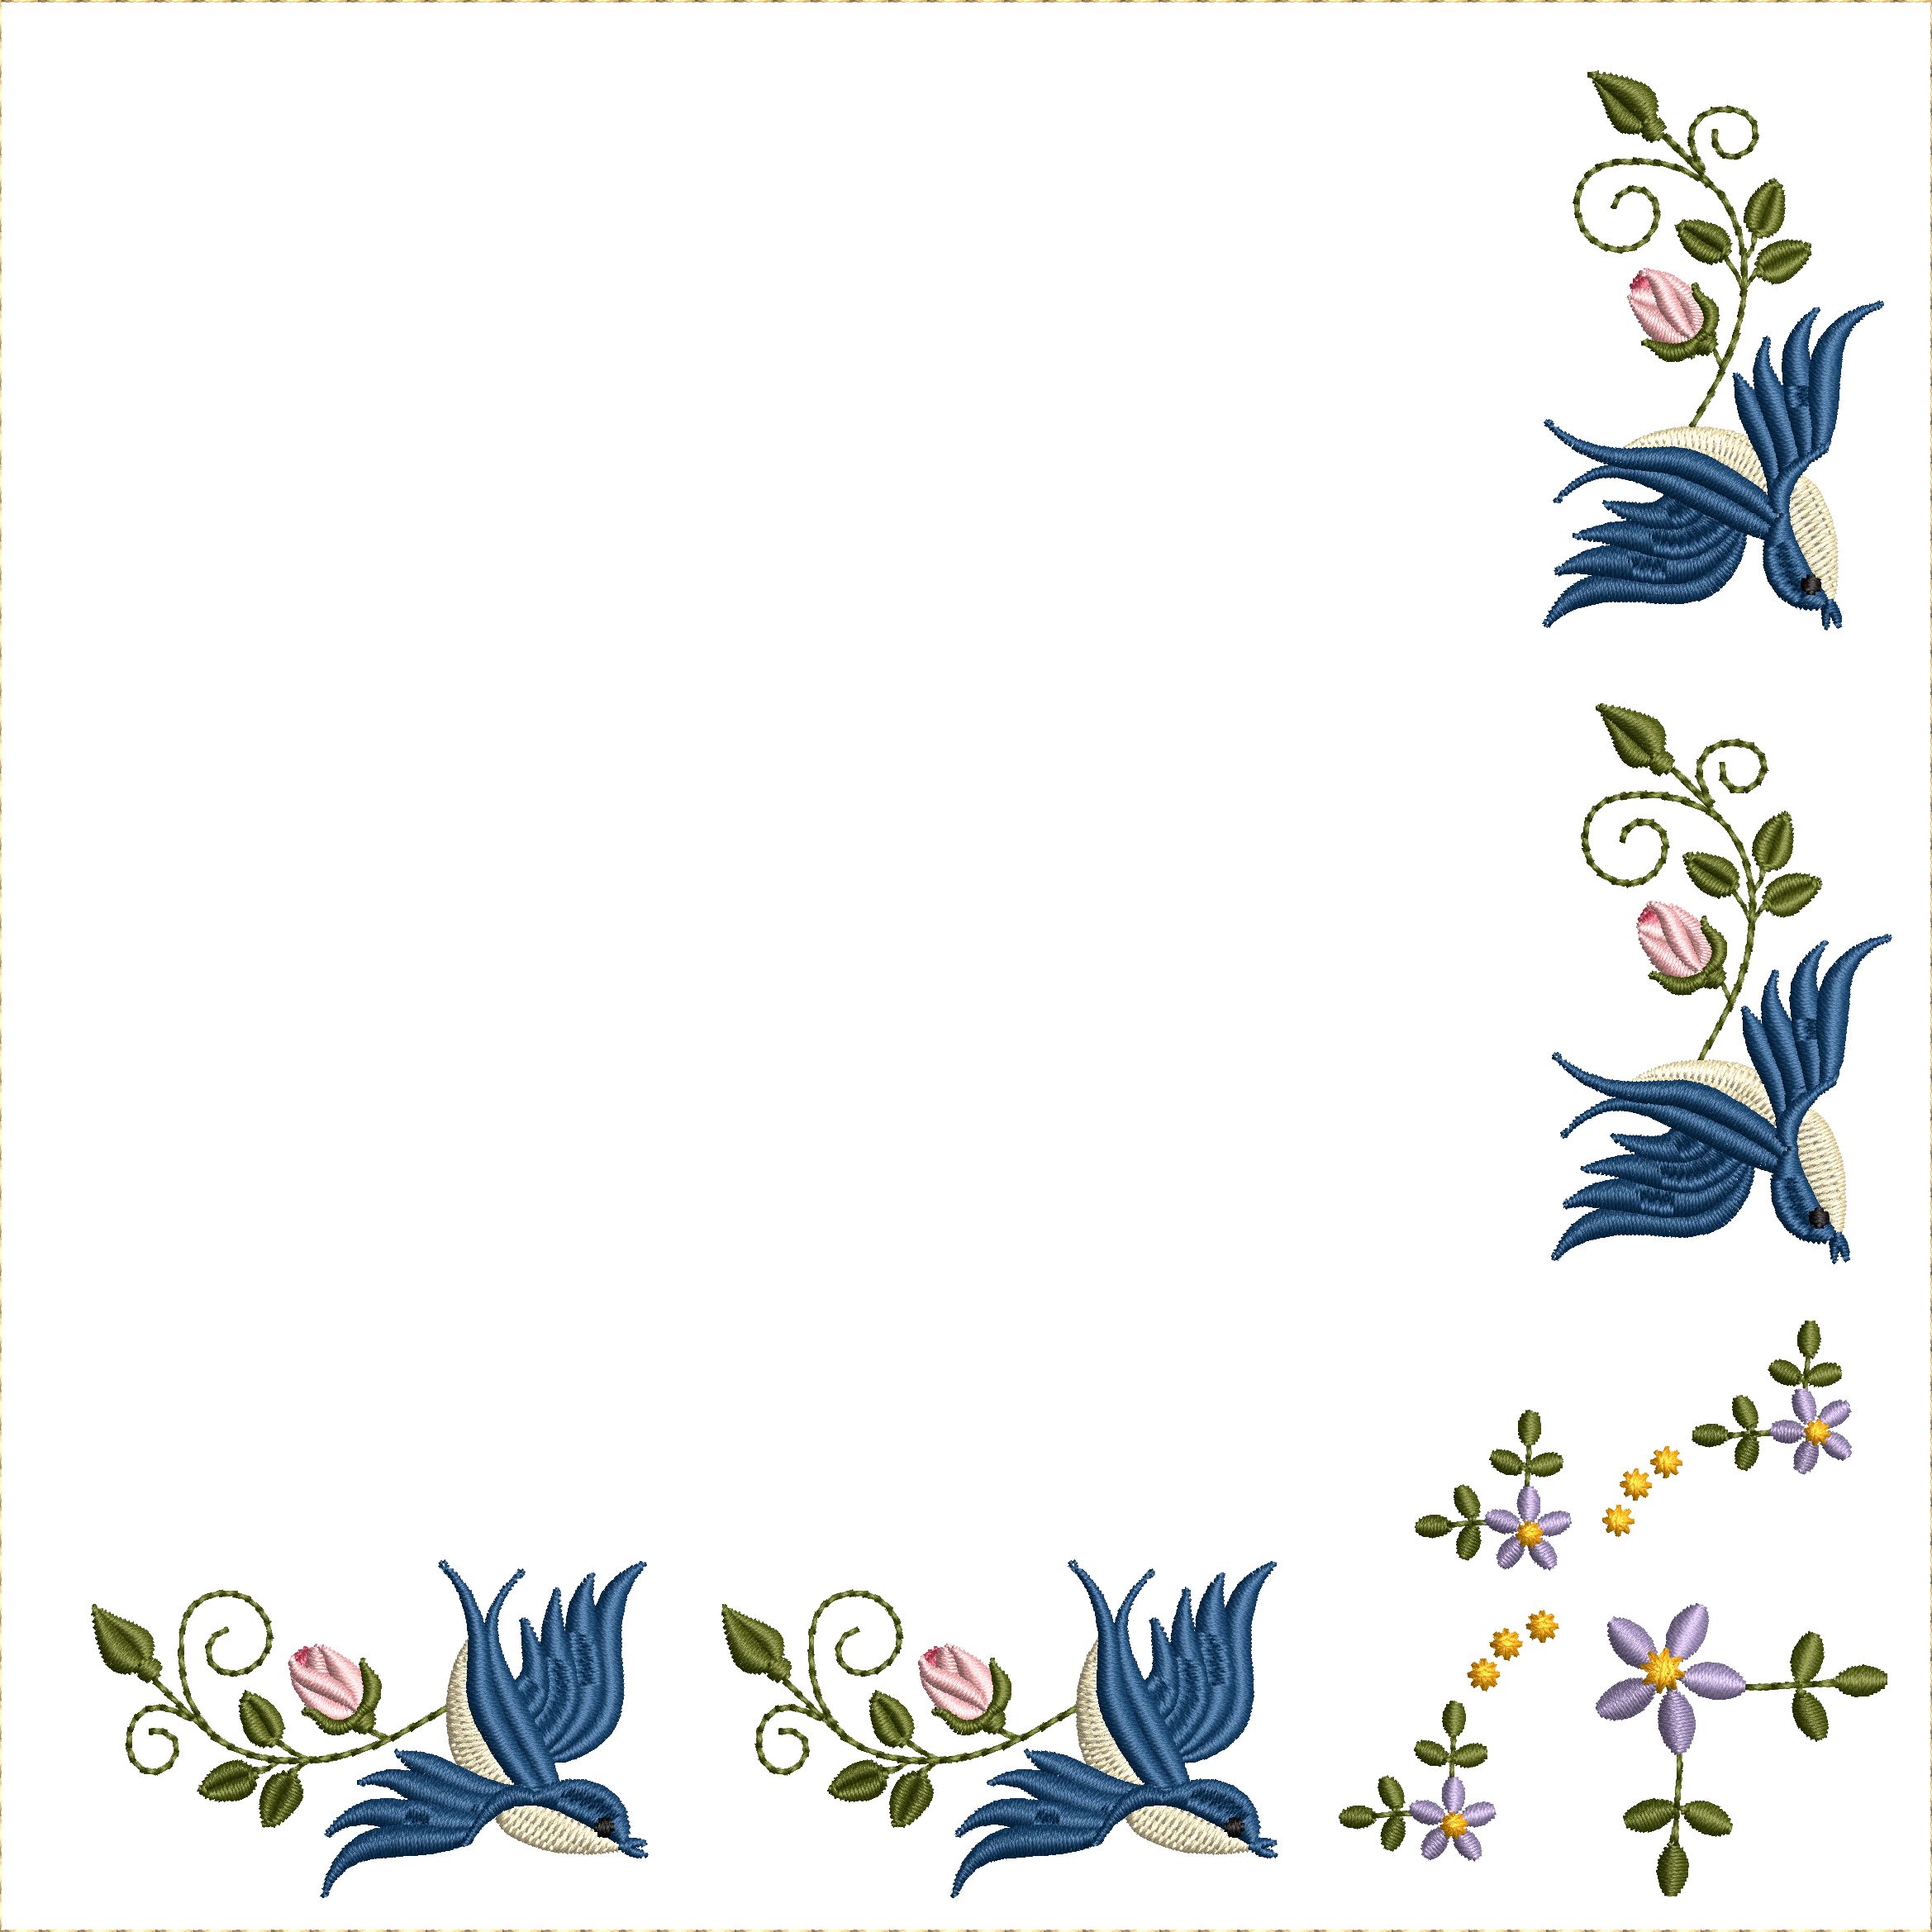 Bluebirds and Roses Quilt Blocks 8x8-31